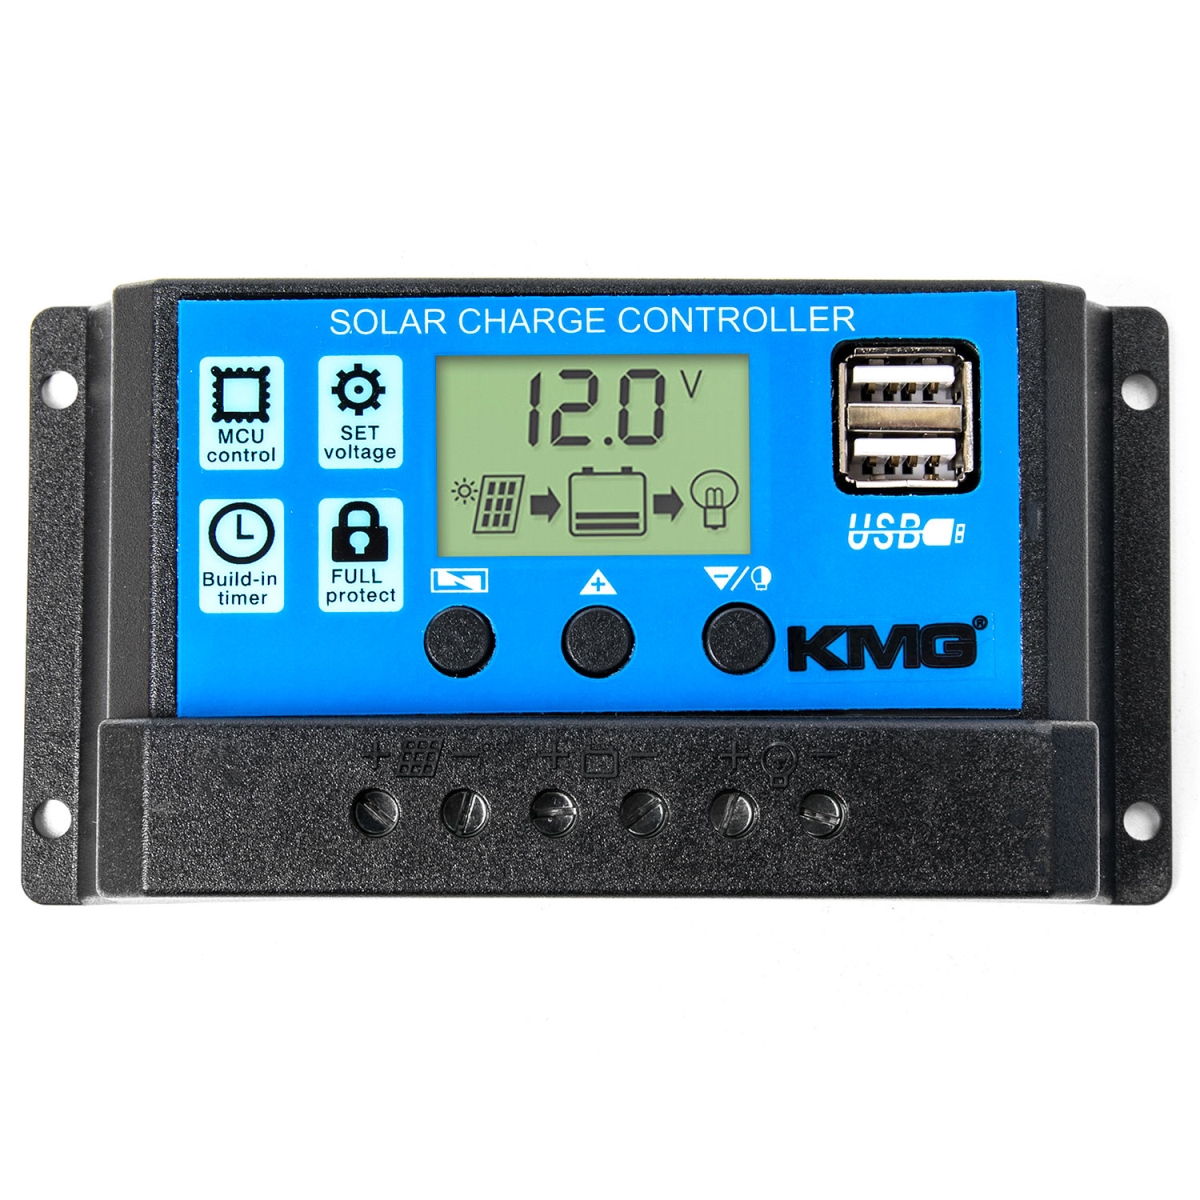 Sp30a 30a Solar Charger Controller 12v-24v Solar Panel Battery Pwm Intelligent Regulator With Dual Usb Port, Lcd Display & Overload Protection